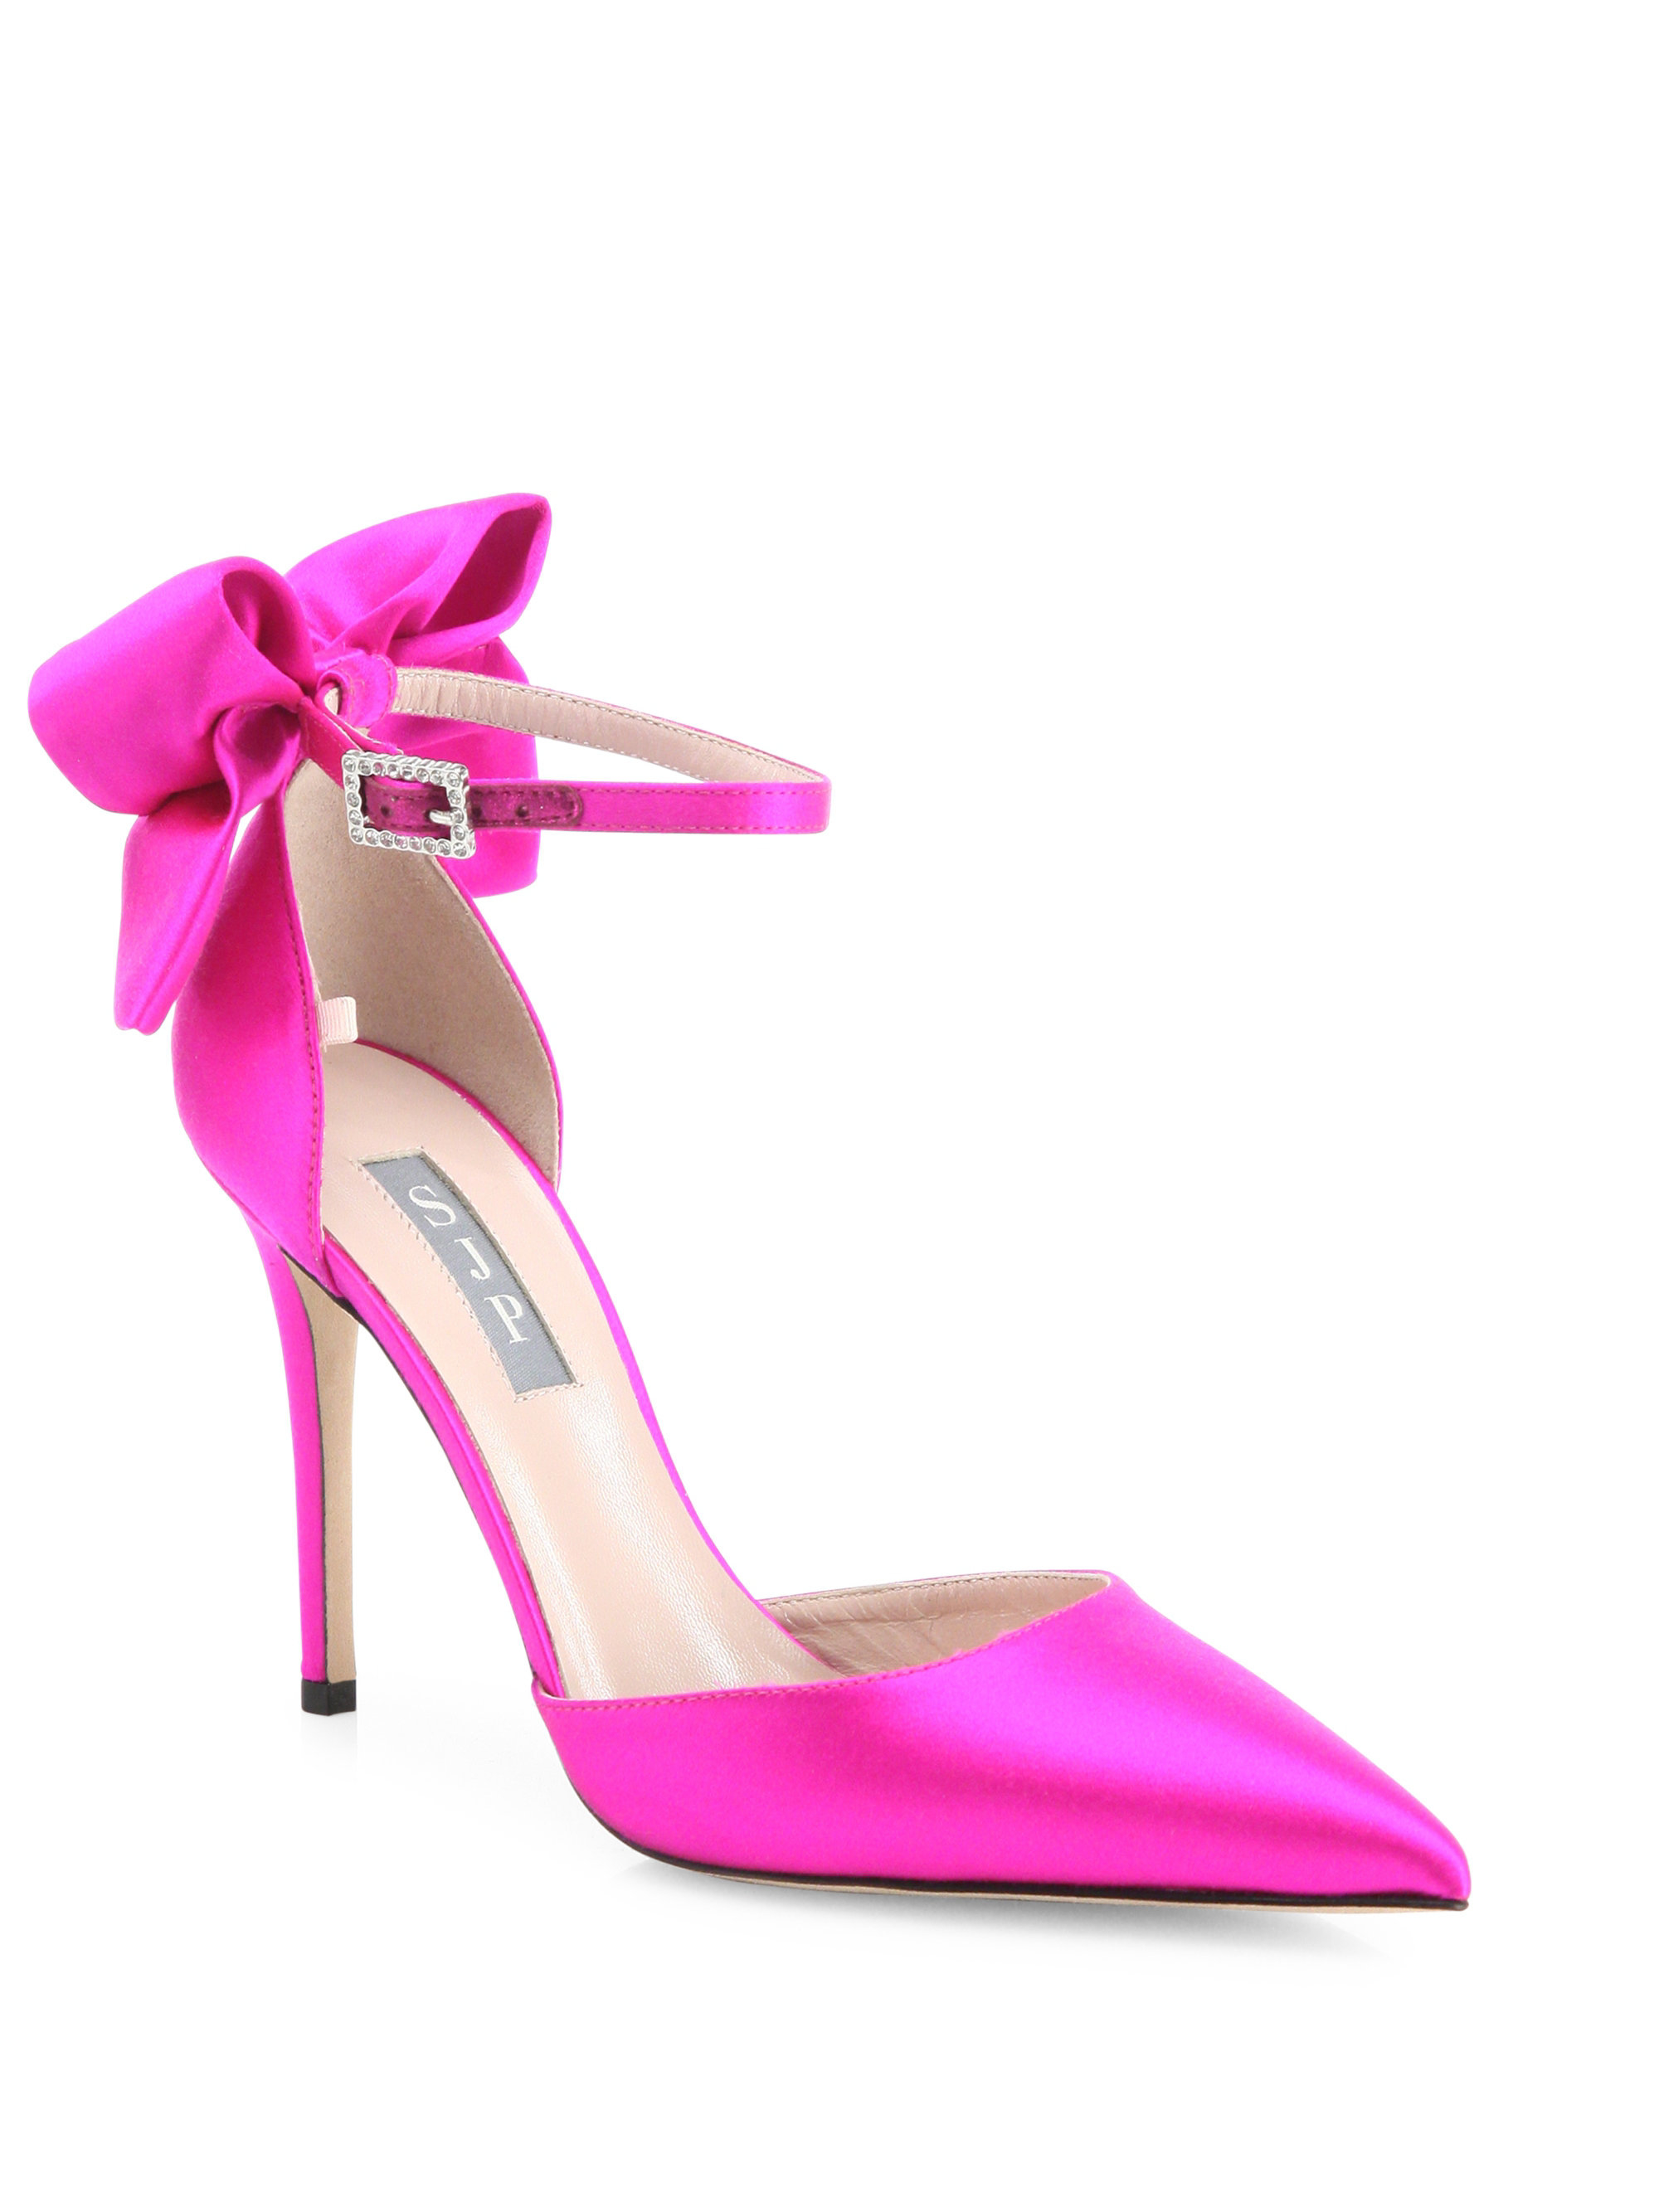 Sjp by sarah jessica parker Trance Satin Point Toe Bow Pumps in Pink | Lyst